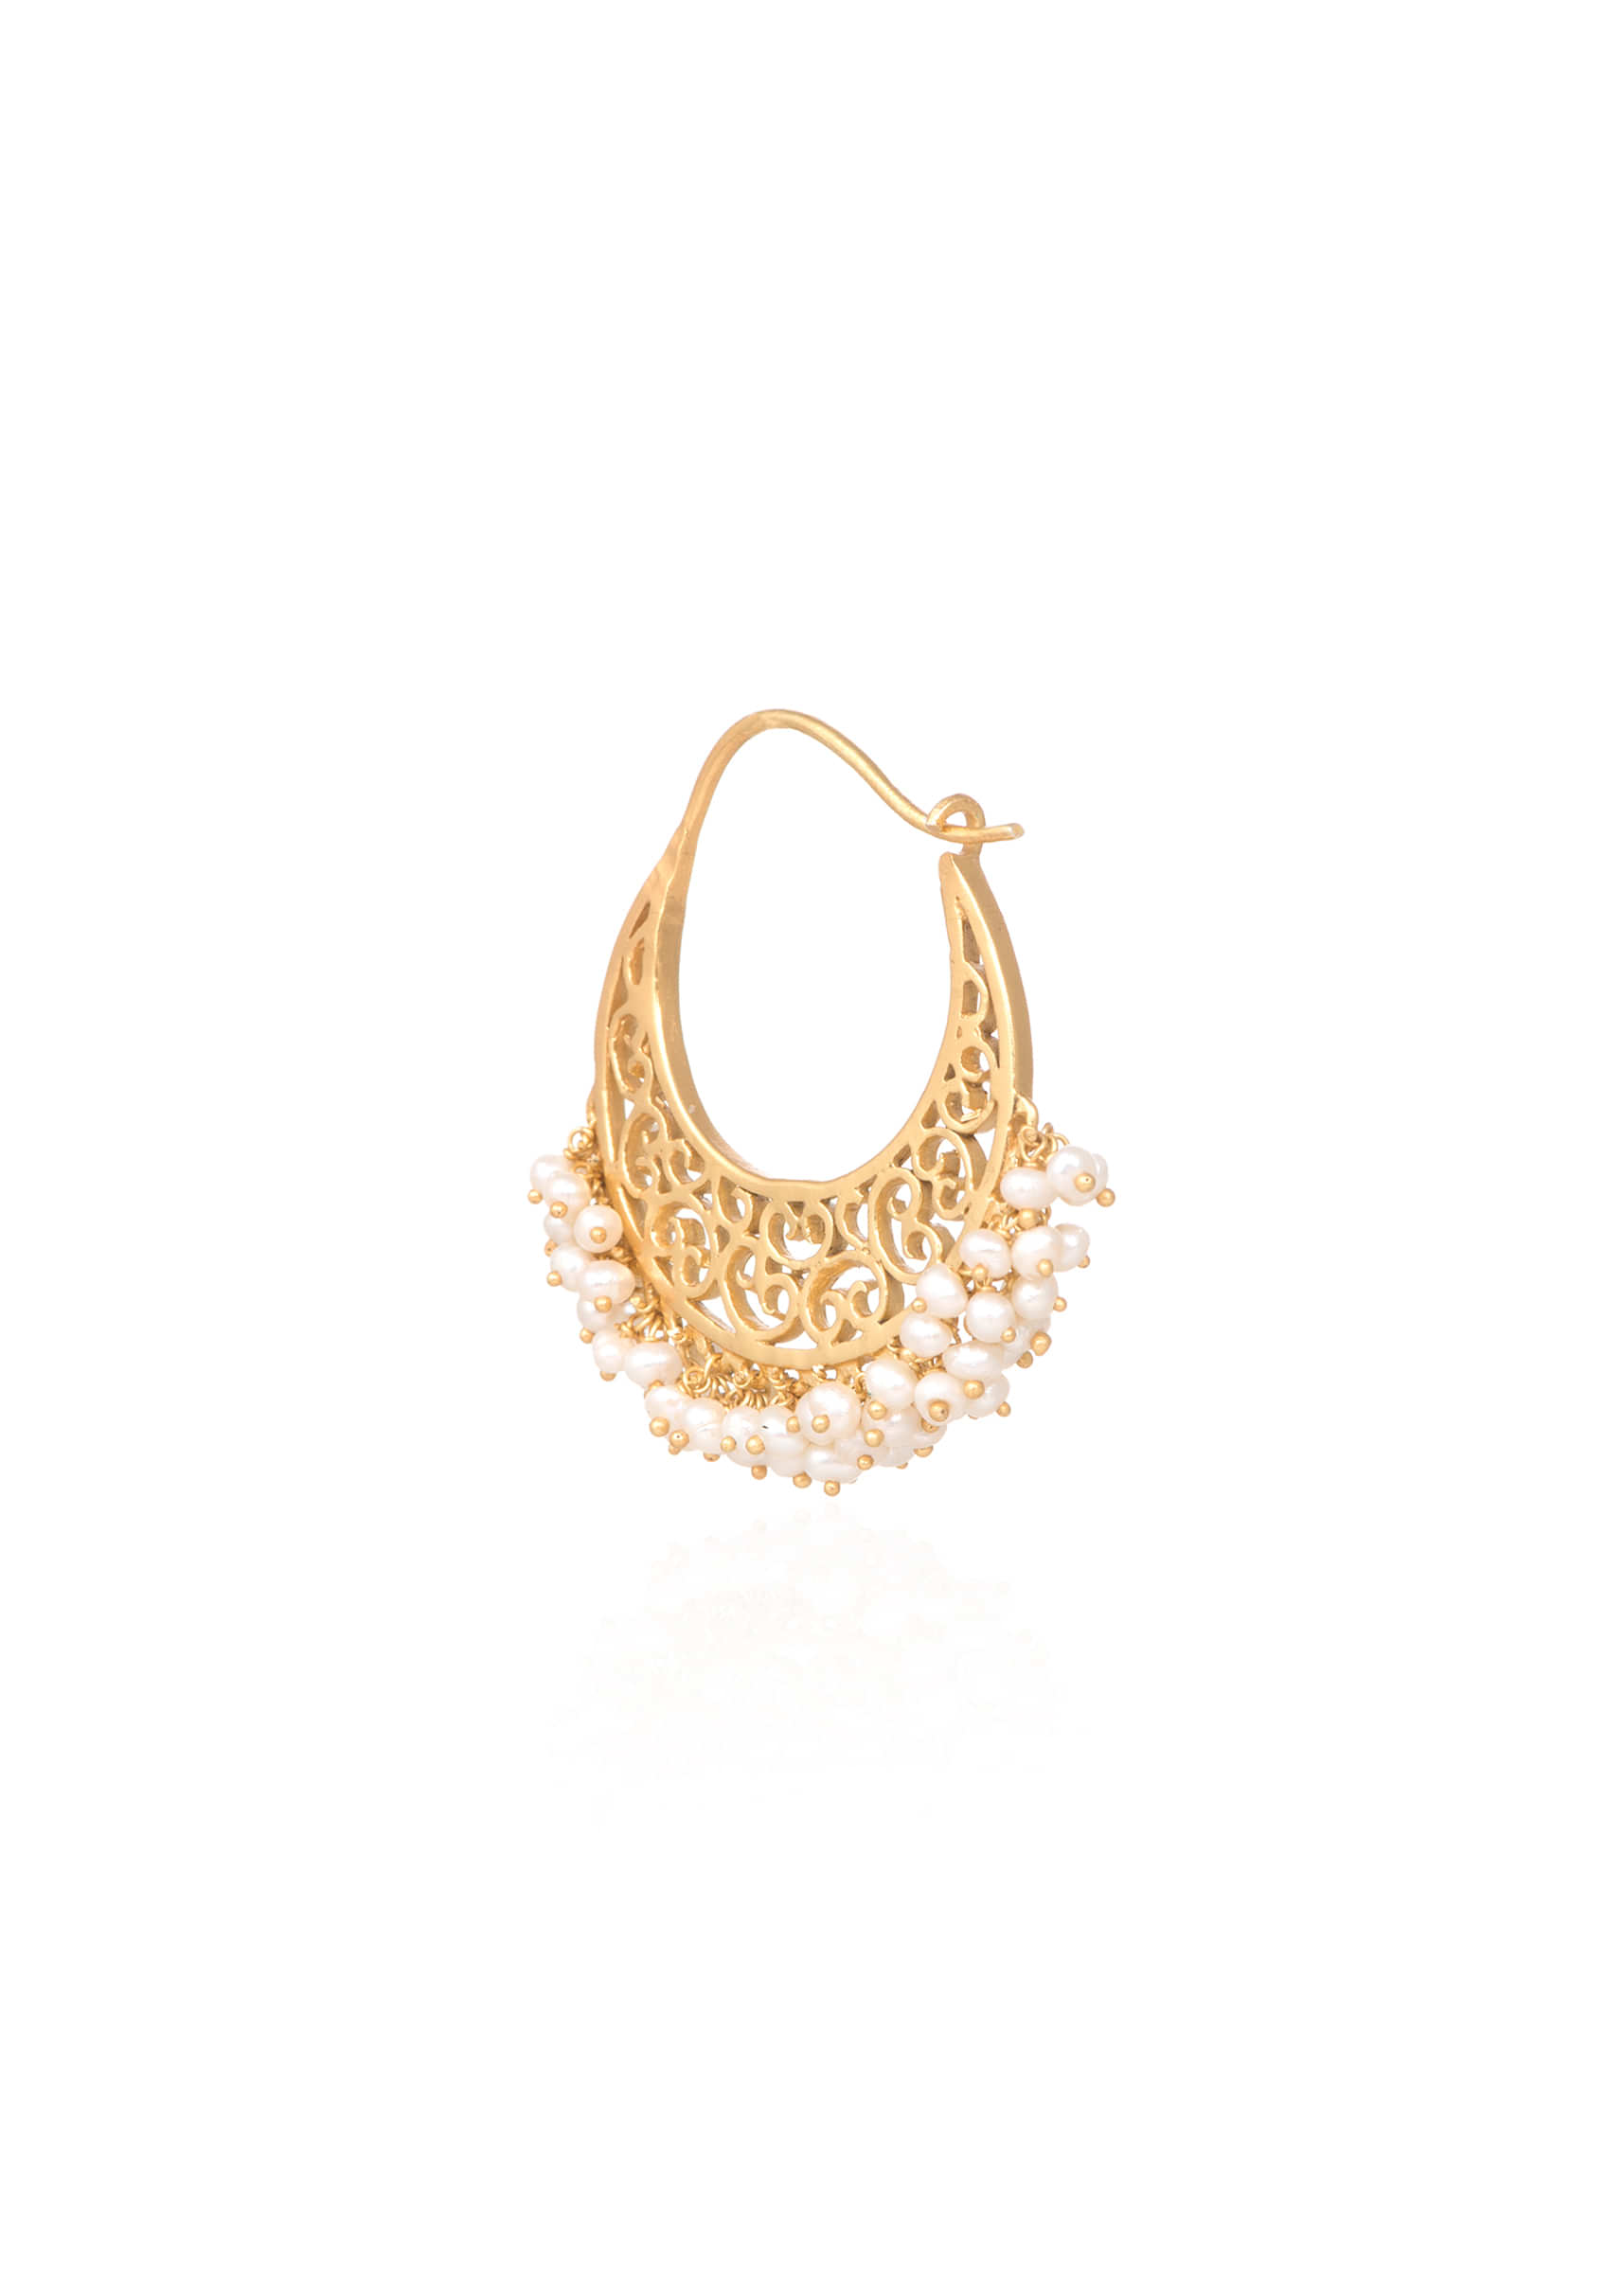 Gold Plated Hoop Earrings With Filigree Design And Pearls On The Edge By Zariin